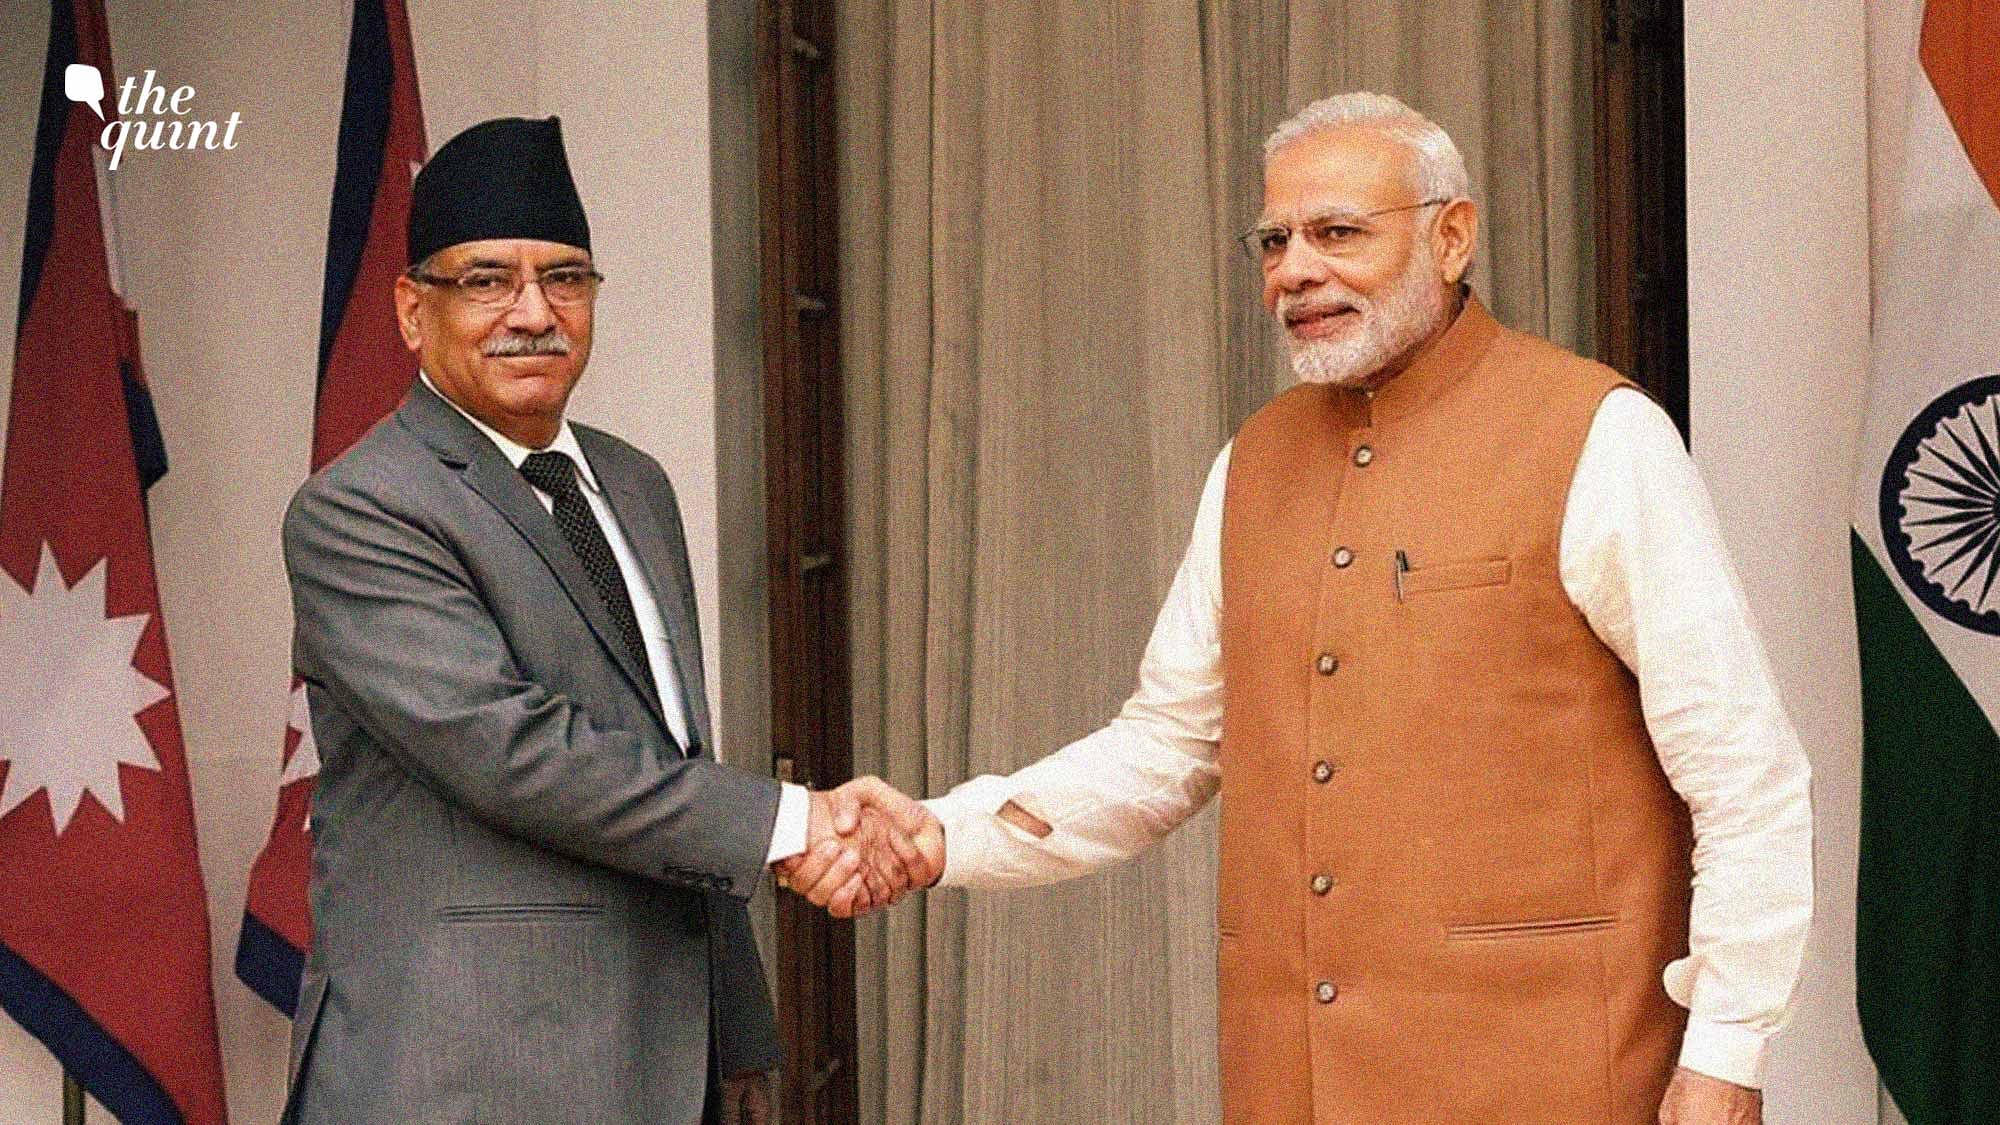 <div class="paragraphs"><p>Prachanda has had a long association with India. He led the decade-long Maoist insurgency from 1996 to 2006 before joining mainstream politics after signing the twelve-point agreement in New Delhi. Of those ten years, he spent almost eight years underground in India.</p></div>